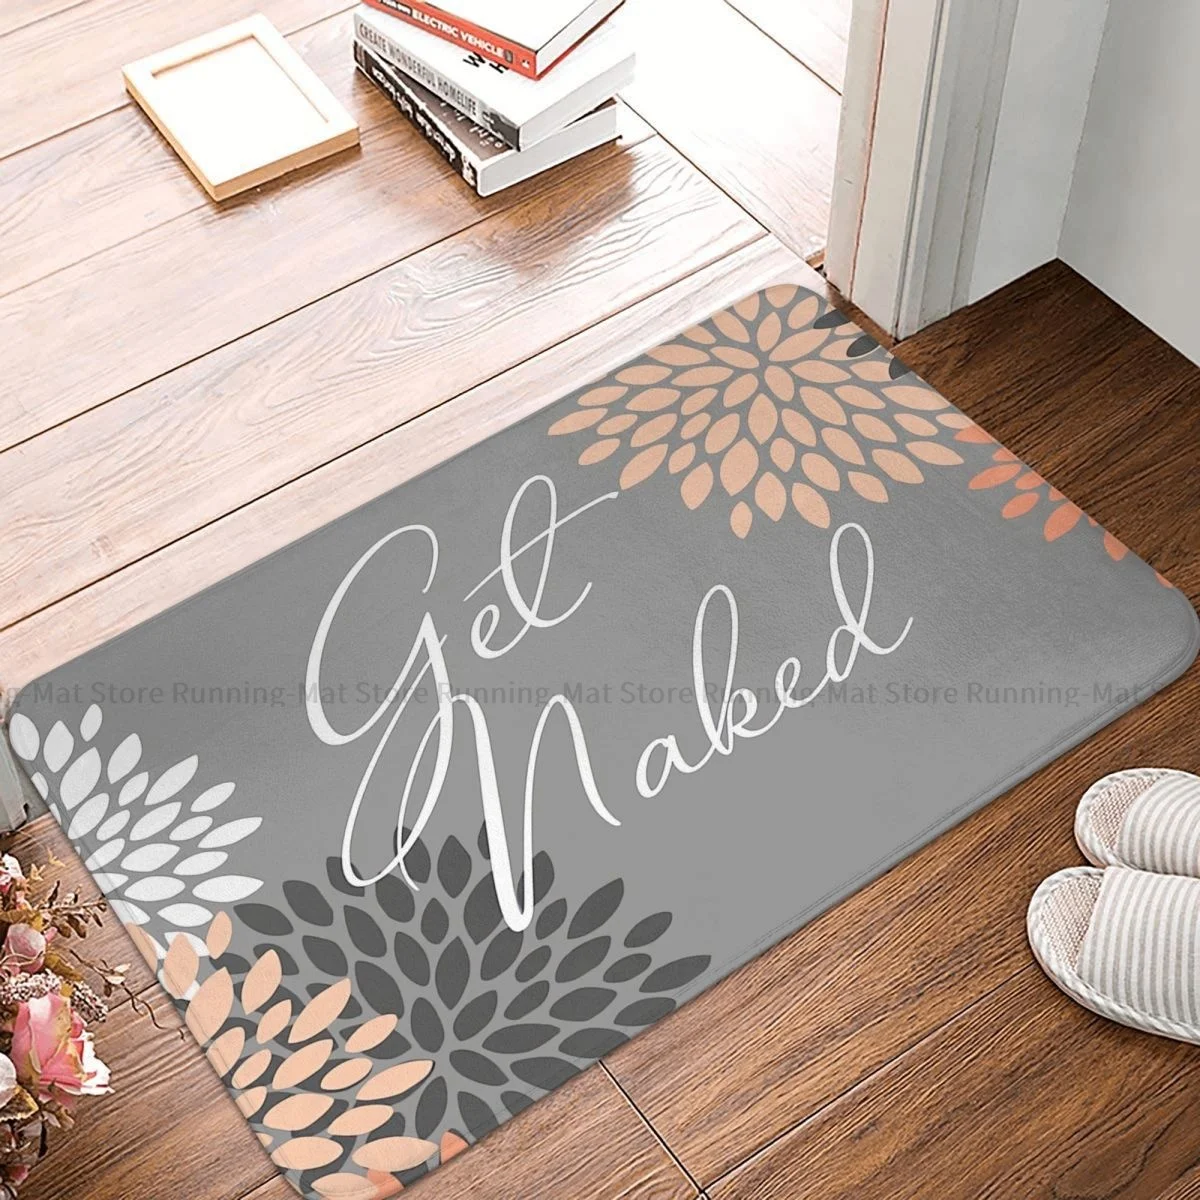 

Get Naked Bath Mat Floral Peach Gray White Doormat Living Room Carpet Outdoor Rug Home Decor